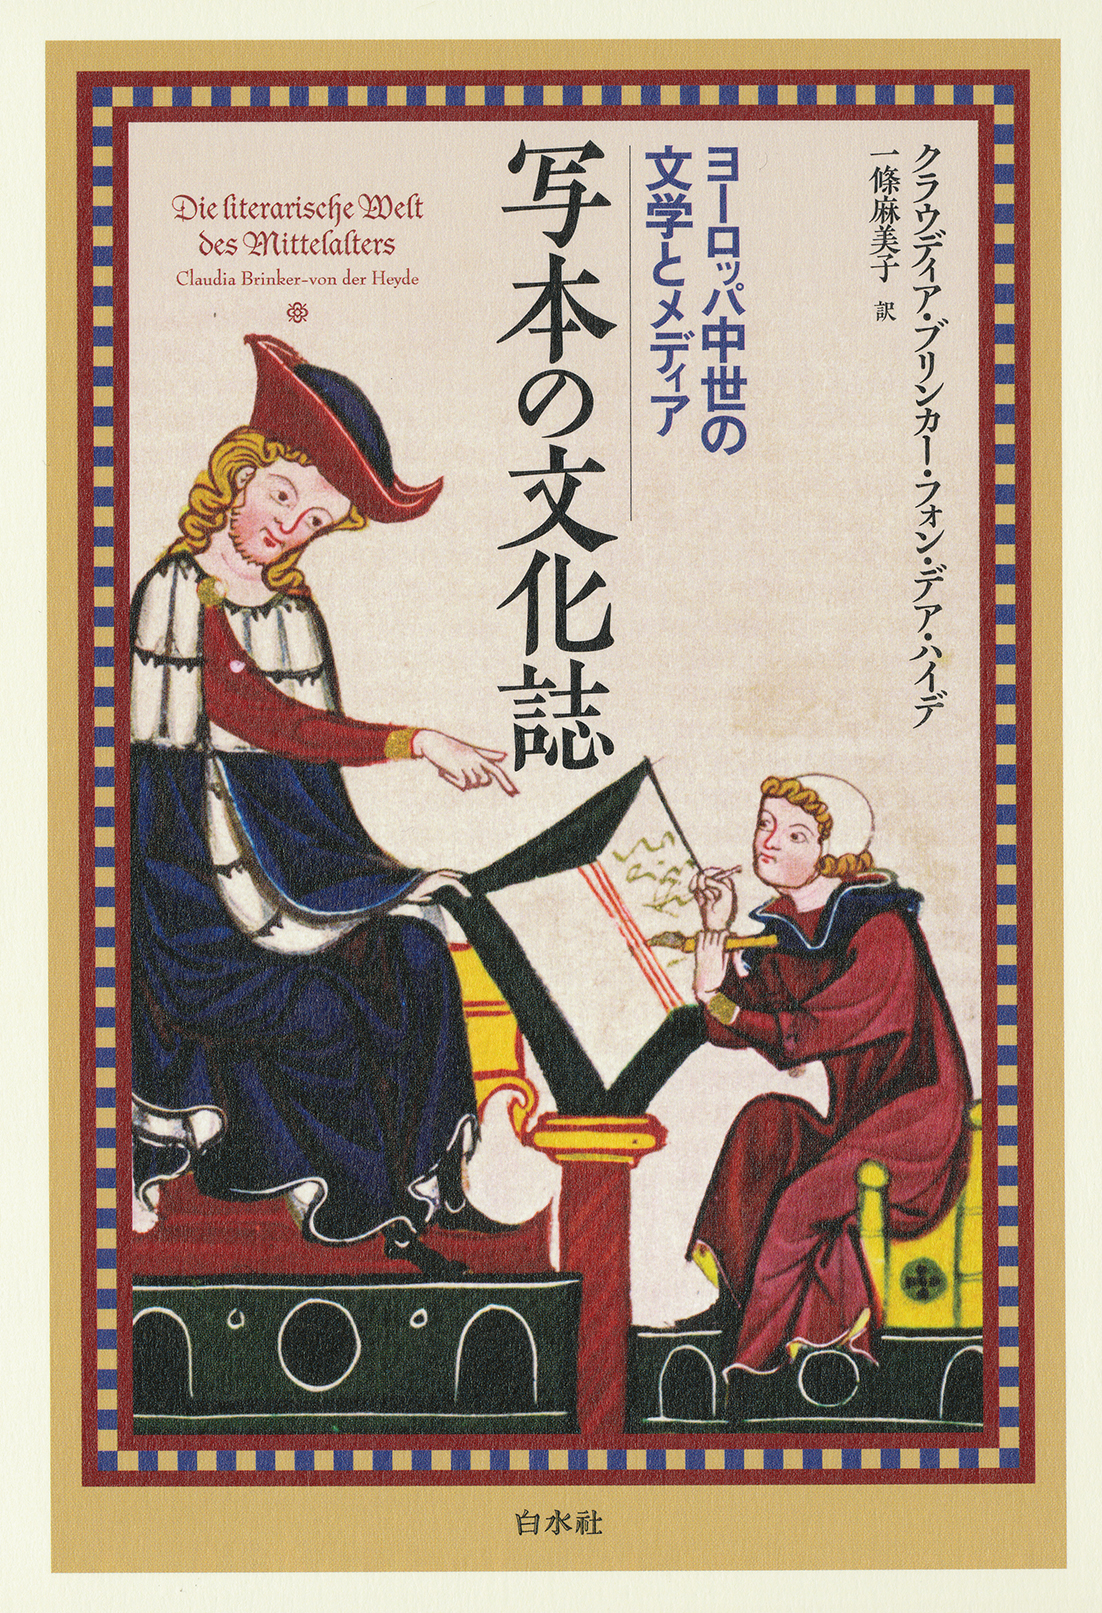 An illustration of a guy and scribe copying